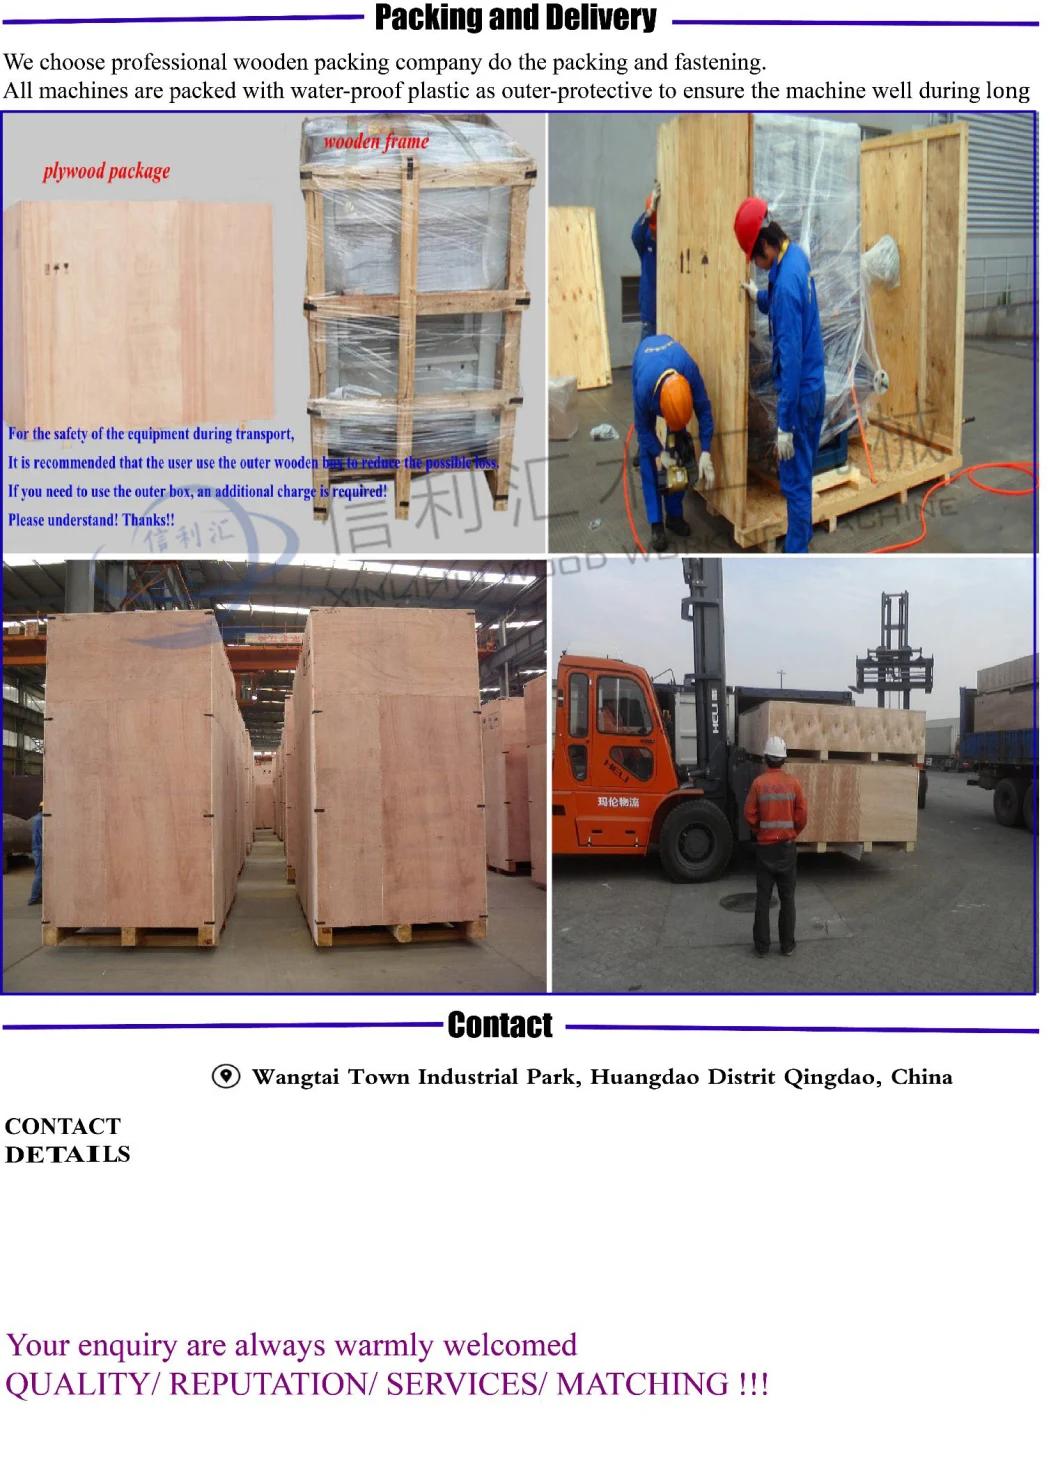 Hot Press for Joinery Board Wood Board Jointing Machines/Jointer Laminate Press Machine for Gluing Wood Timber Hot Press